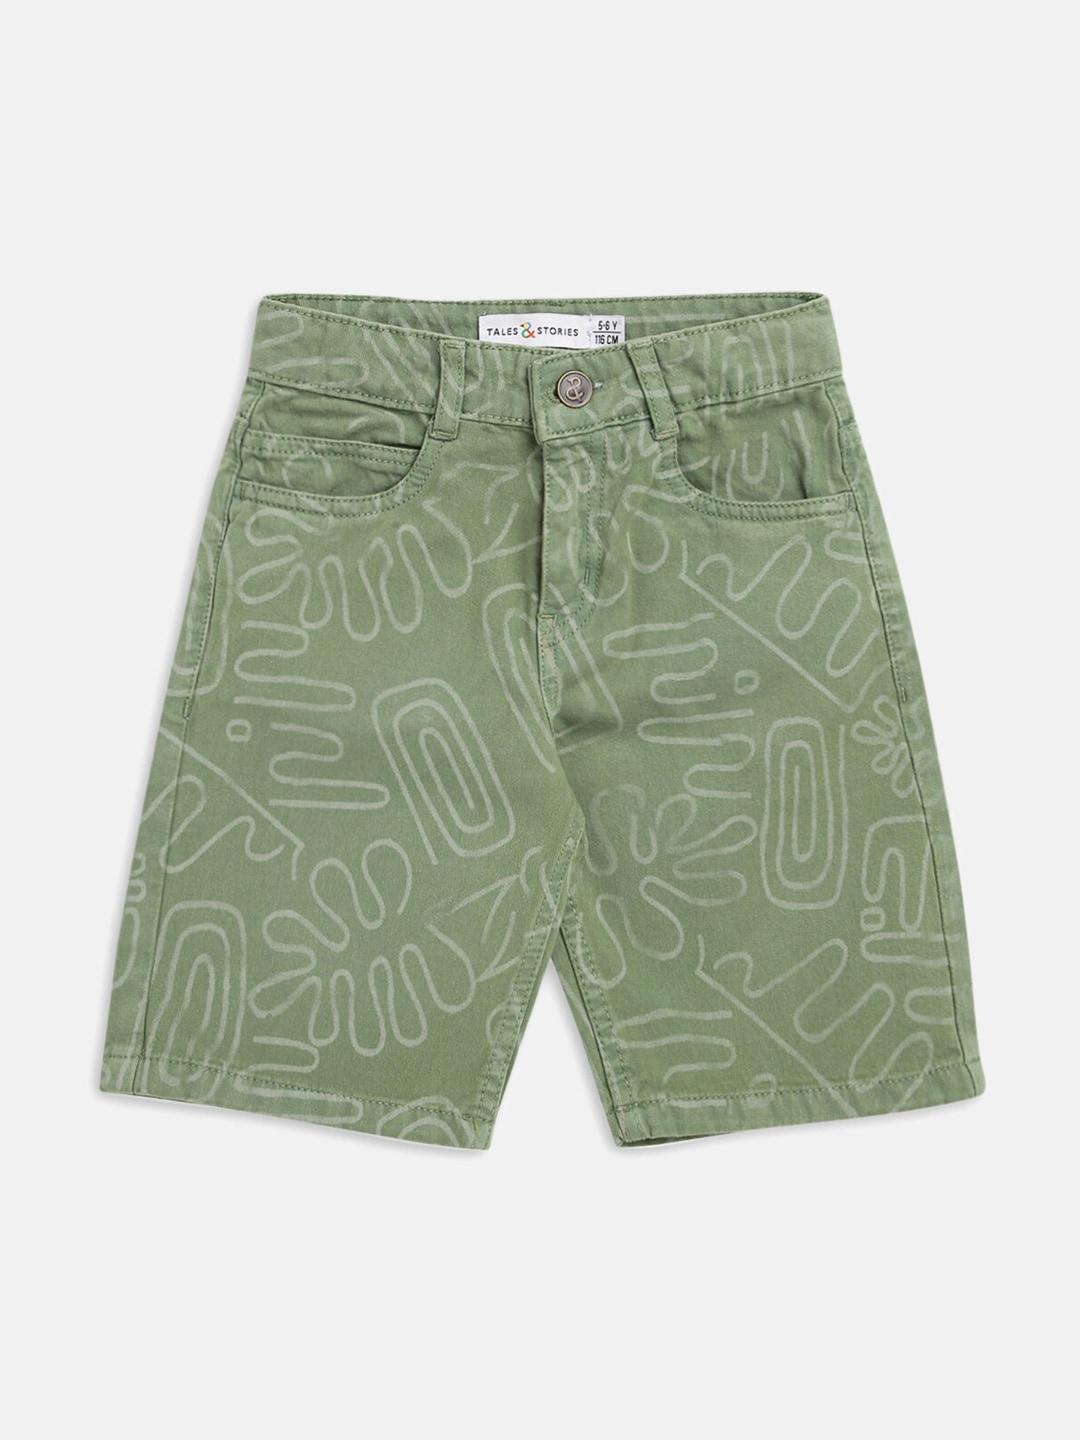 TALES & STORIES Boys Abstract Printed Cotton Shorts